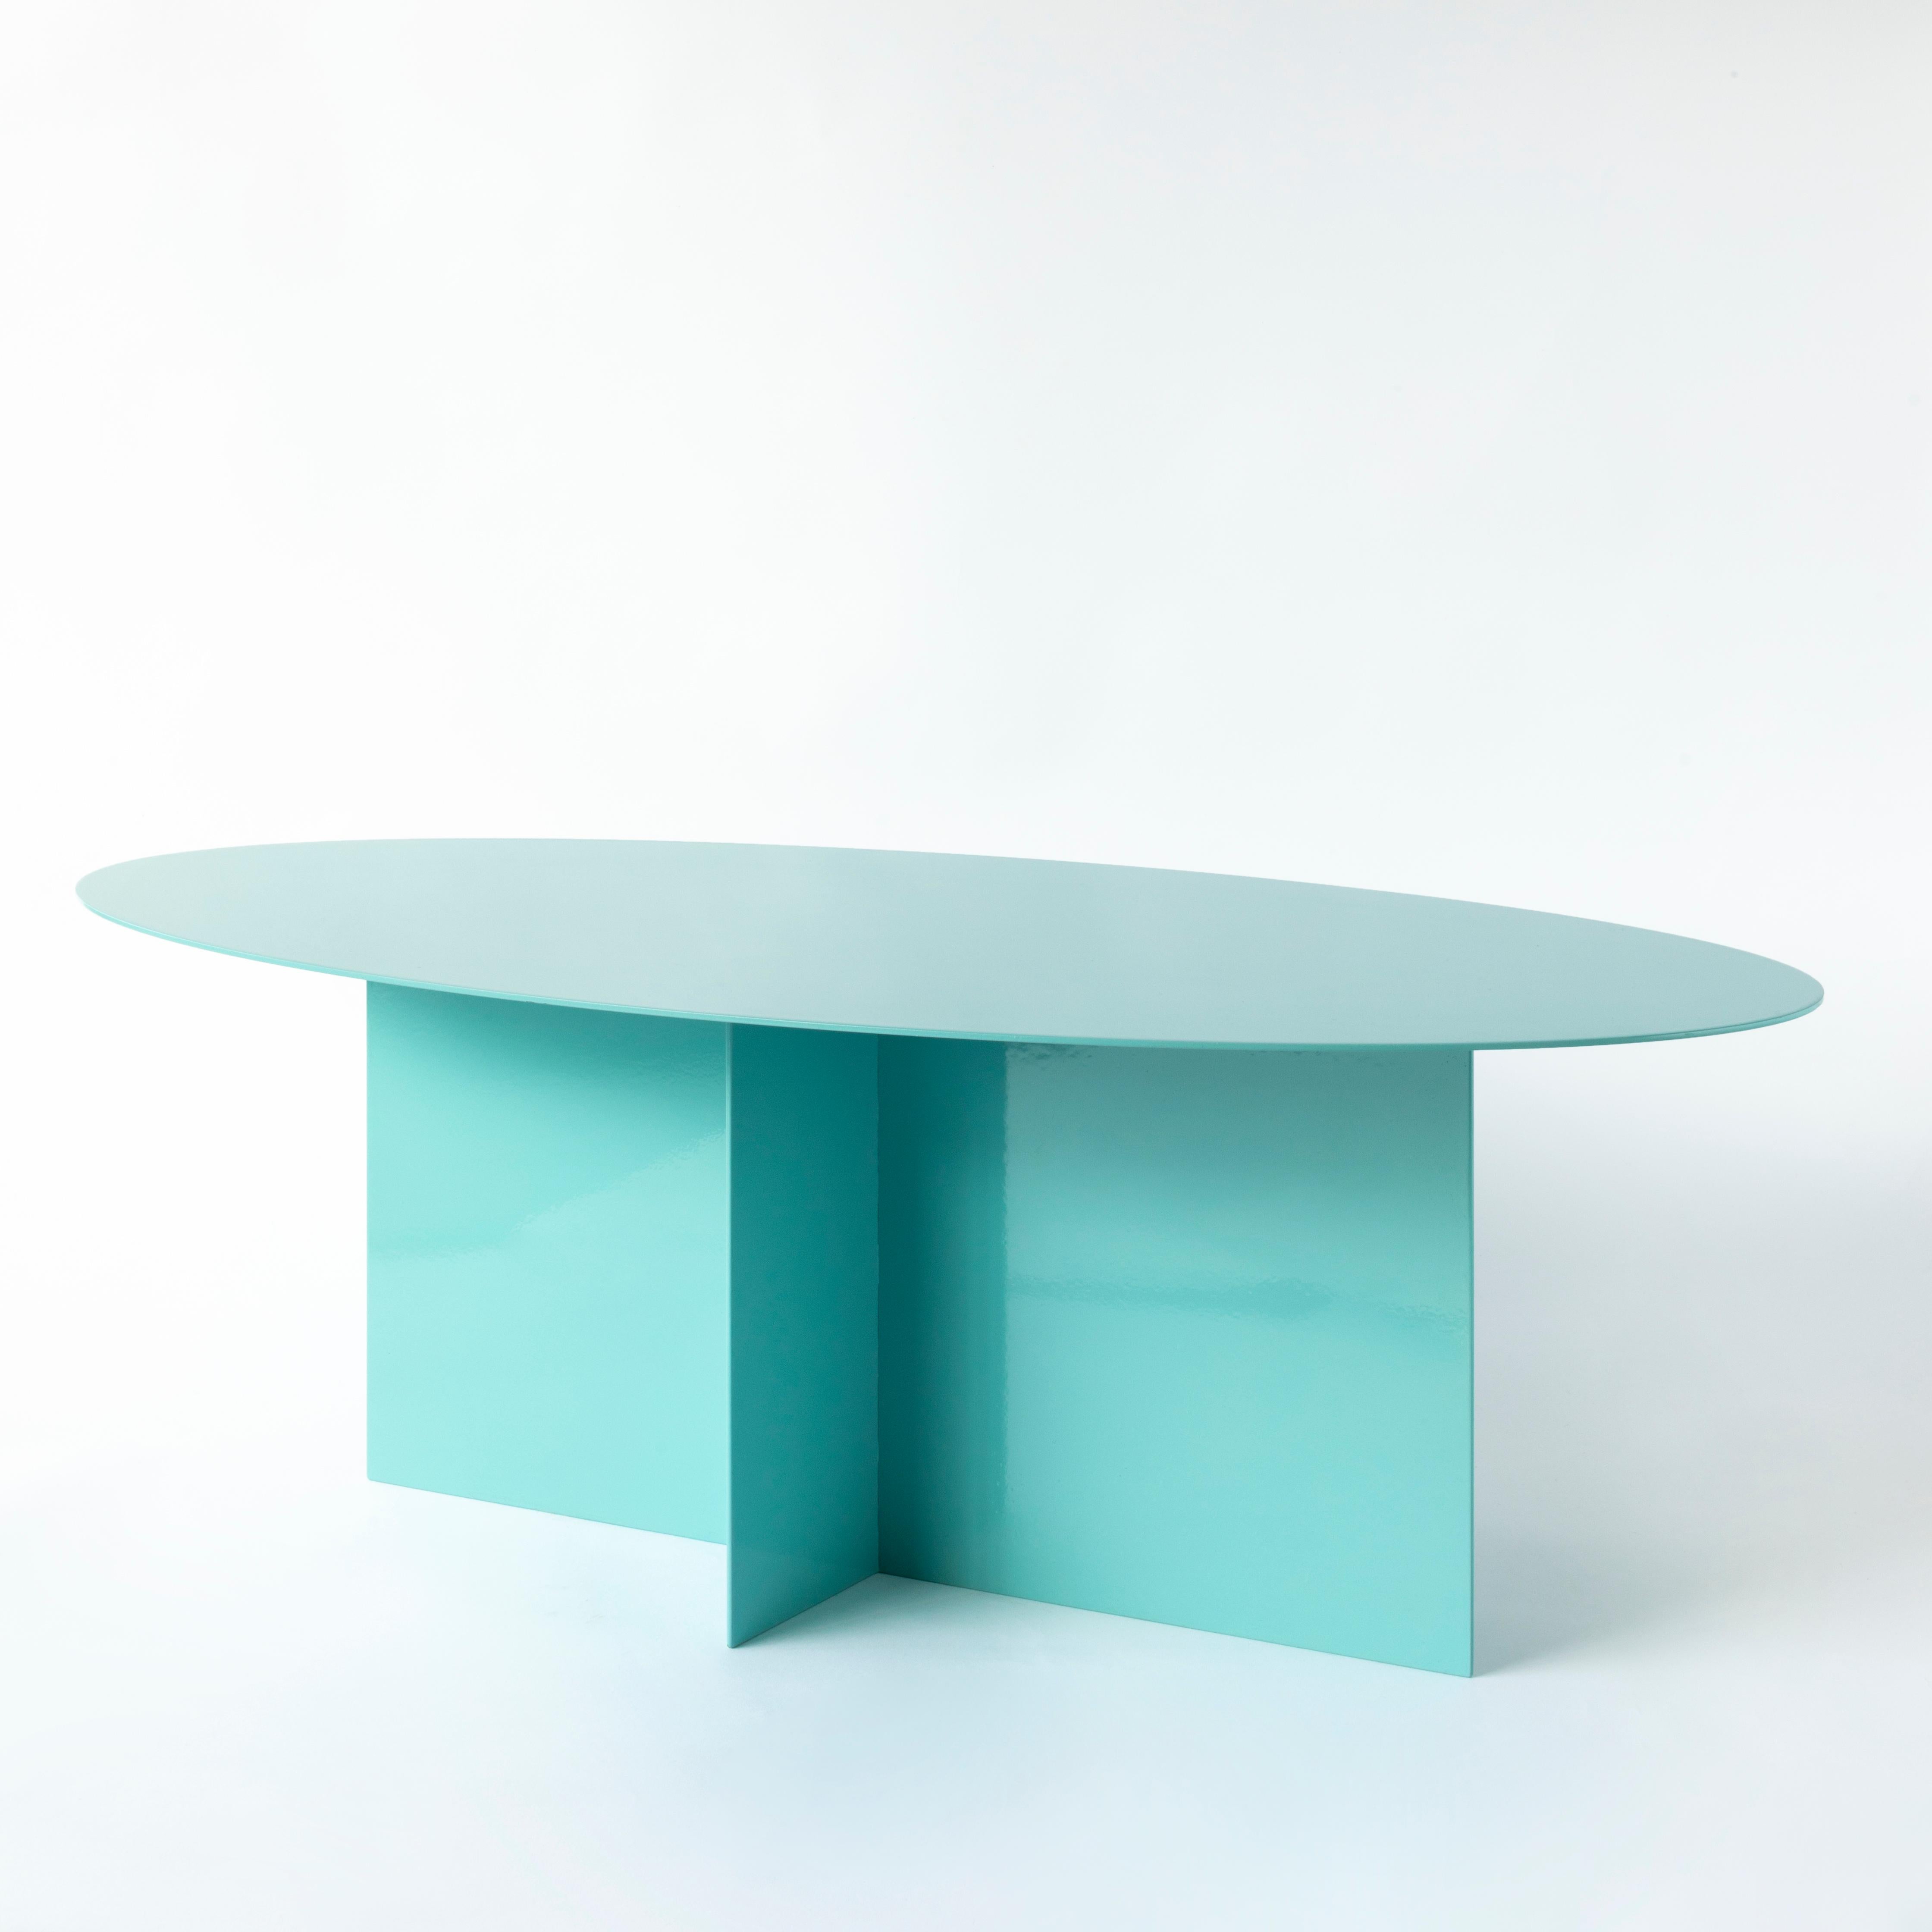 An iron origami that seems light, a game of cross shaped forms and surfaces of any geometric shape define this collection of tables, characterized by a feature common to all my protects: colour.
The cross shaped base fits any shape of top, all